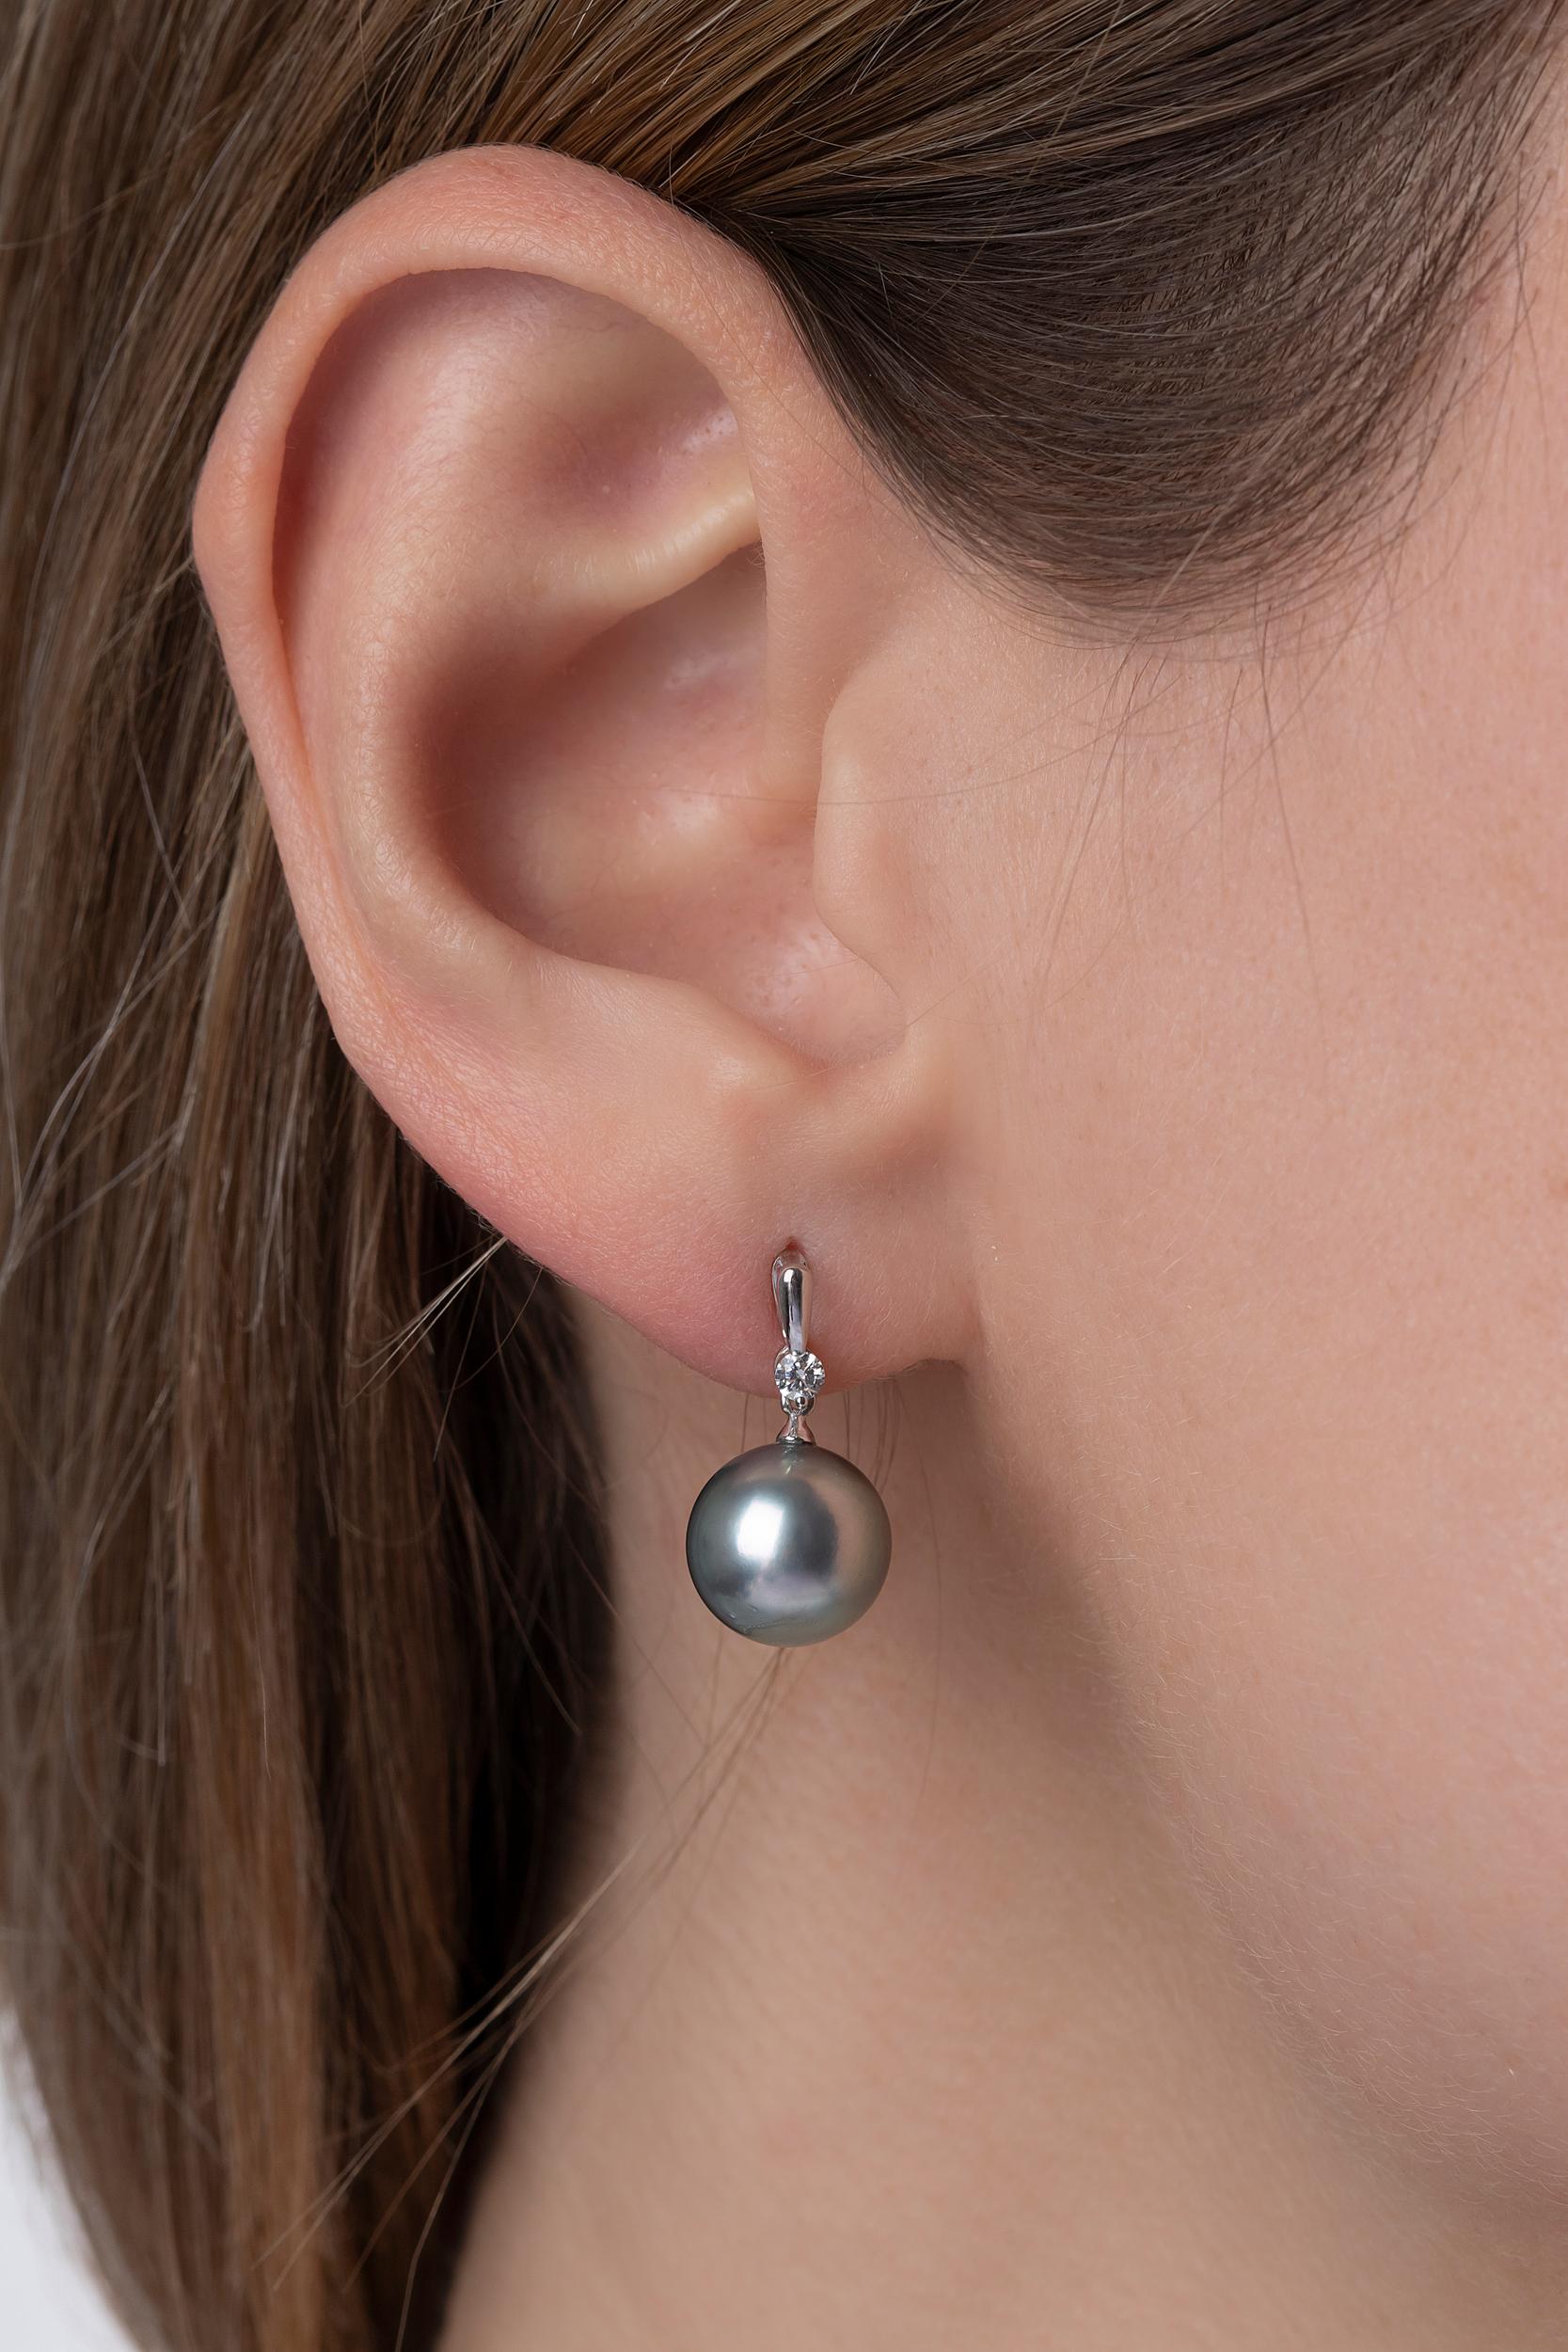 These elegant earrings by Yoko London feature a cool-toned Tahitian pearl suspended beneath a sparkling white diamond, all set in a smooth 18K white gold fitting. Easy to wear for both casual or formal events, and everything in-between these